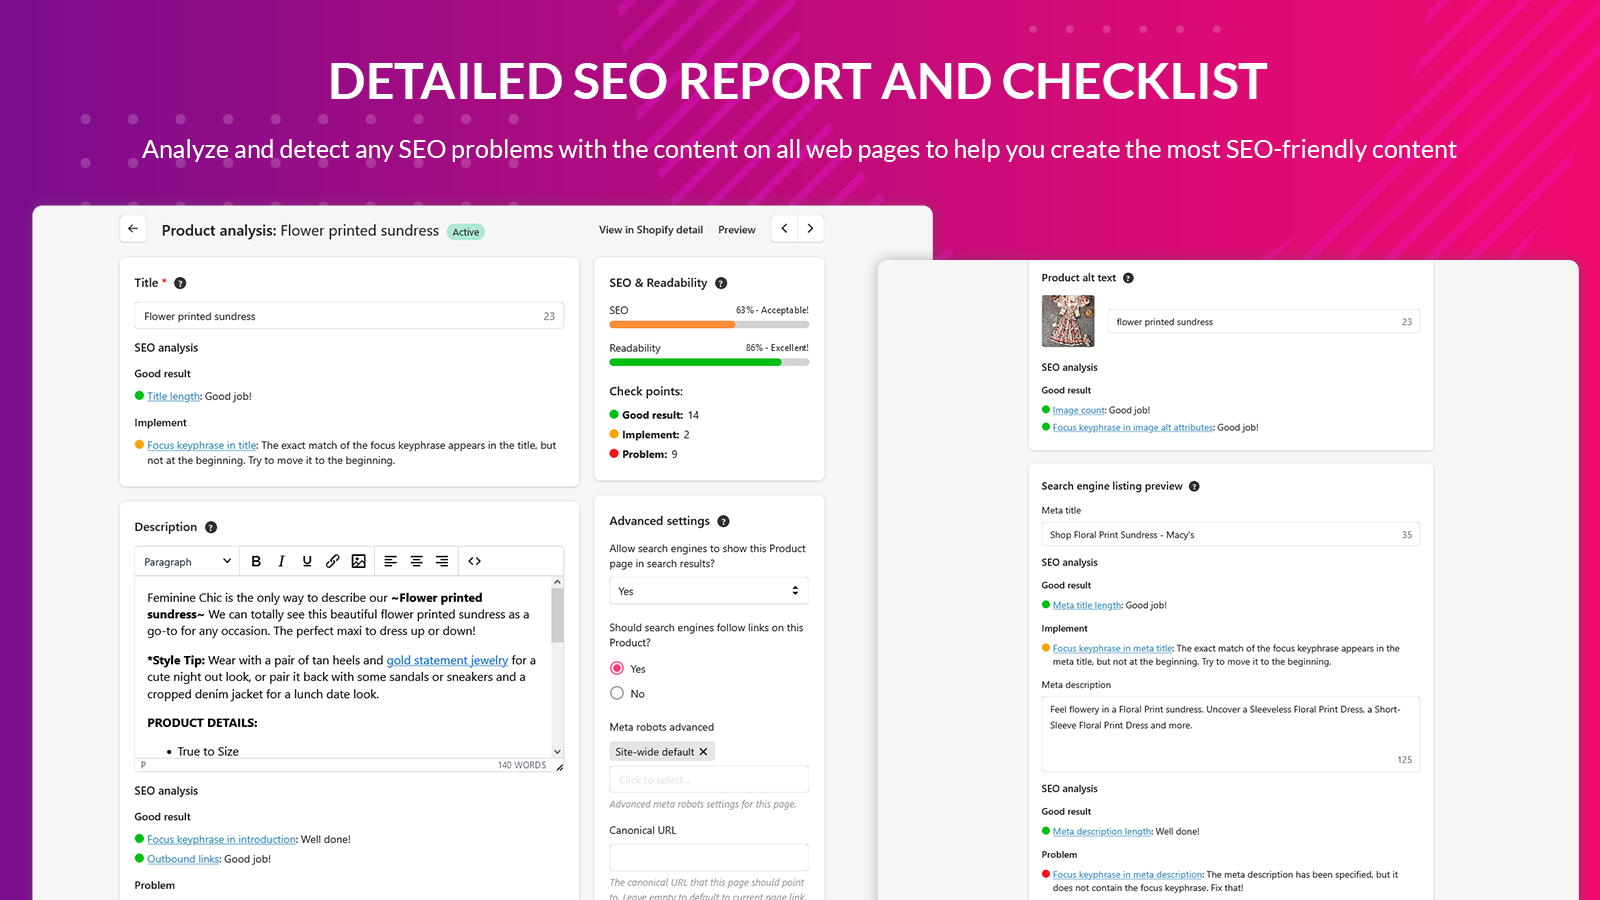 Detailed SEO report and checklist